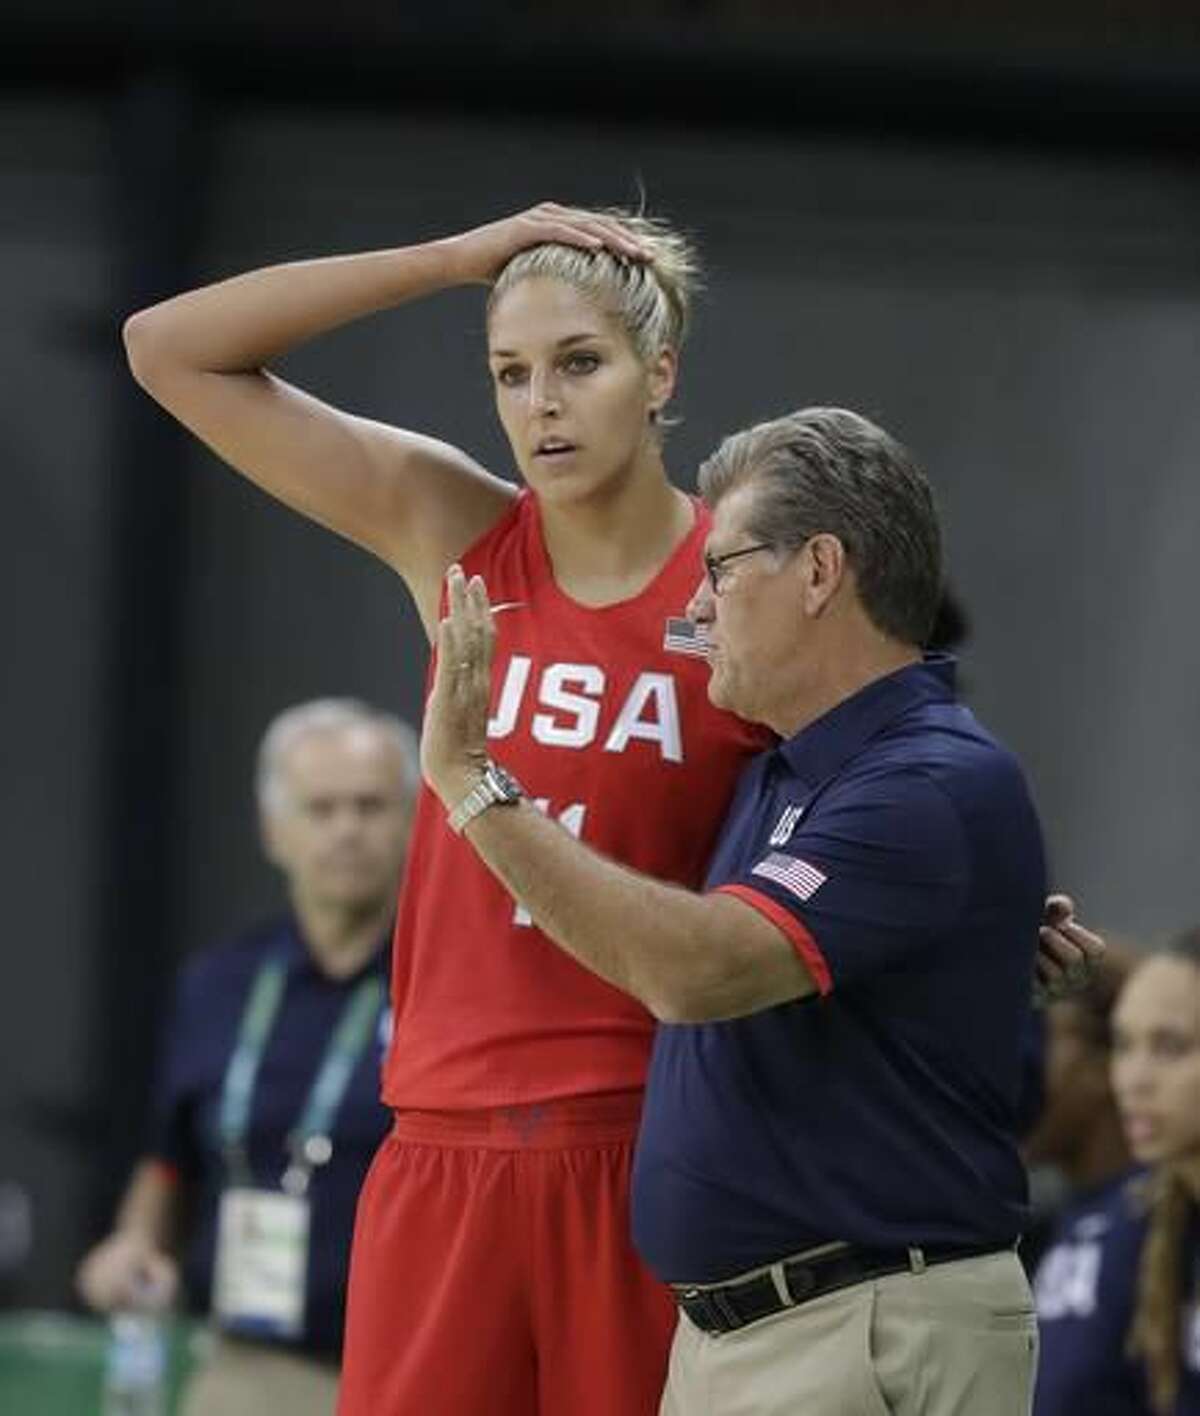 United States guard Elena Delle Donne talks with head coach Geno Auriemma during the first half of a women's basketball game against Spain at the Youth Center at the 2016 Summer Olympics in Rio de Janeiro, Brazil, Monday, Aug. 8, 2016. (AP Photo/Carlos Osorio)